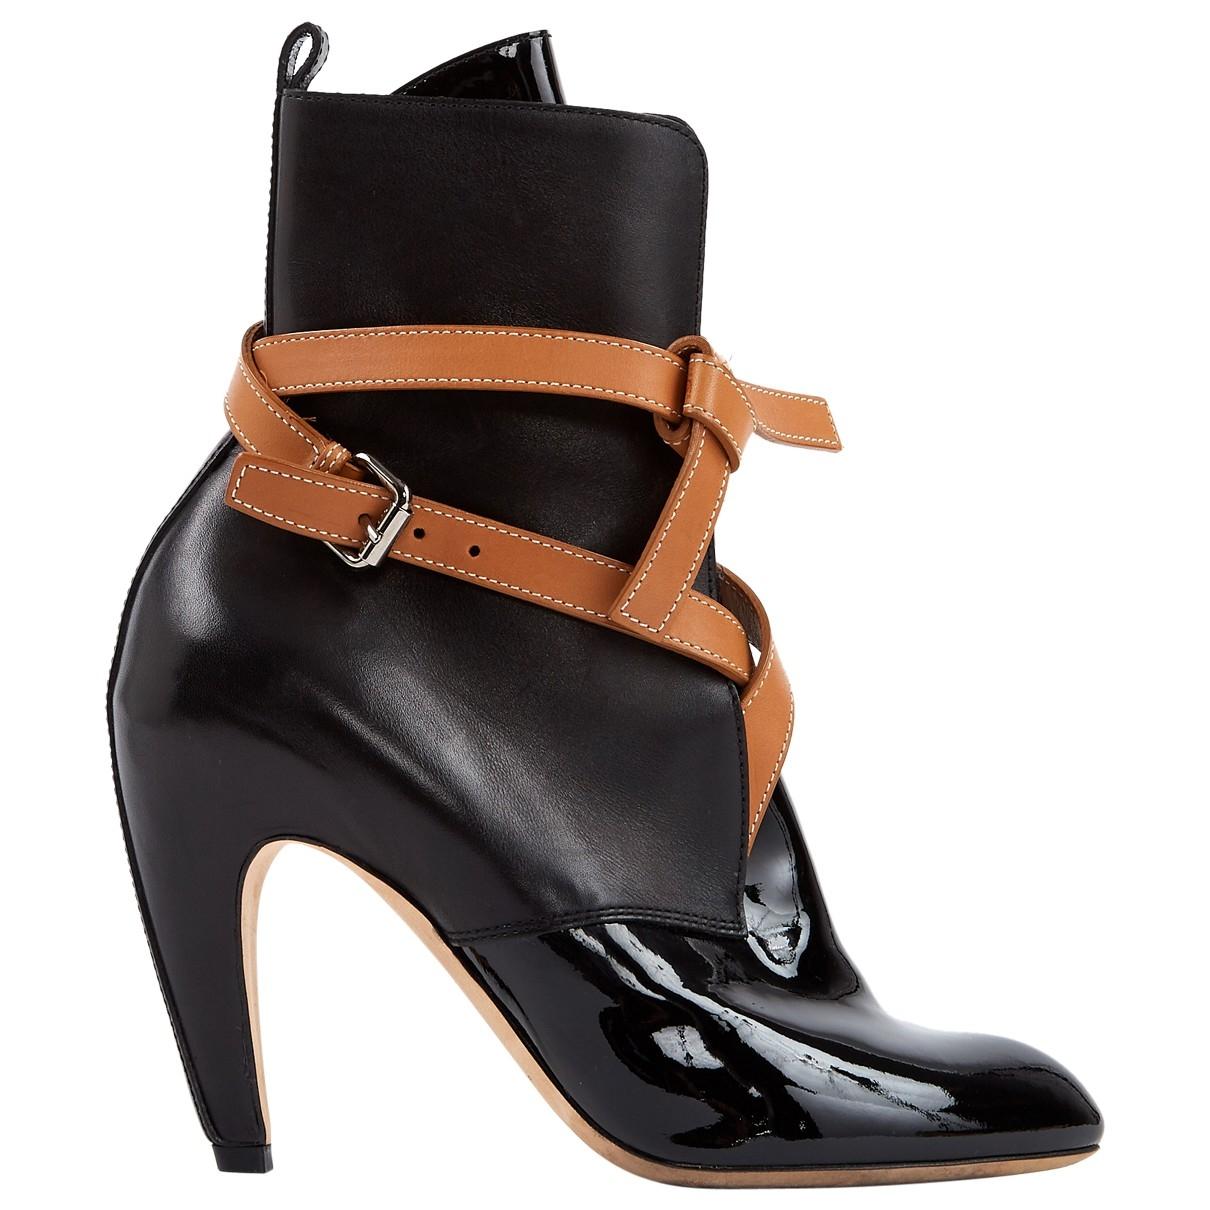 Lyst - Louis Vuitton Patent Leather Boots in Black